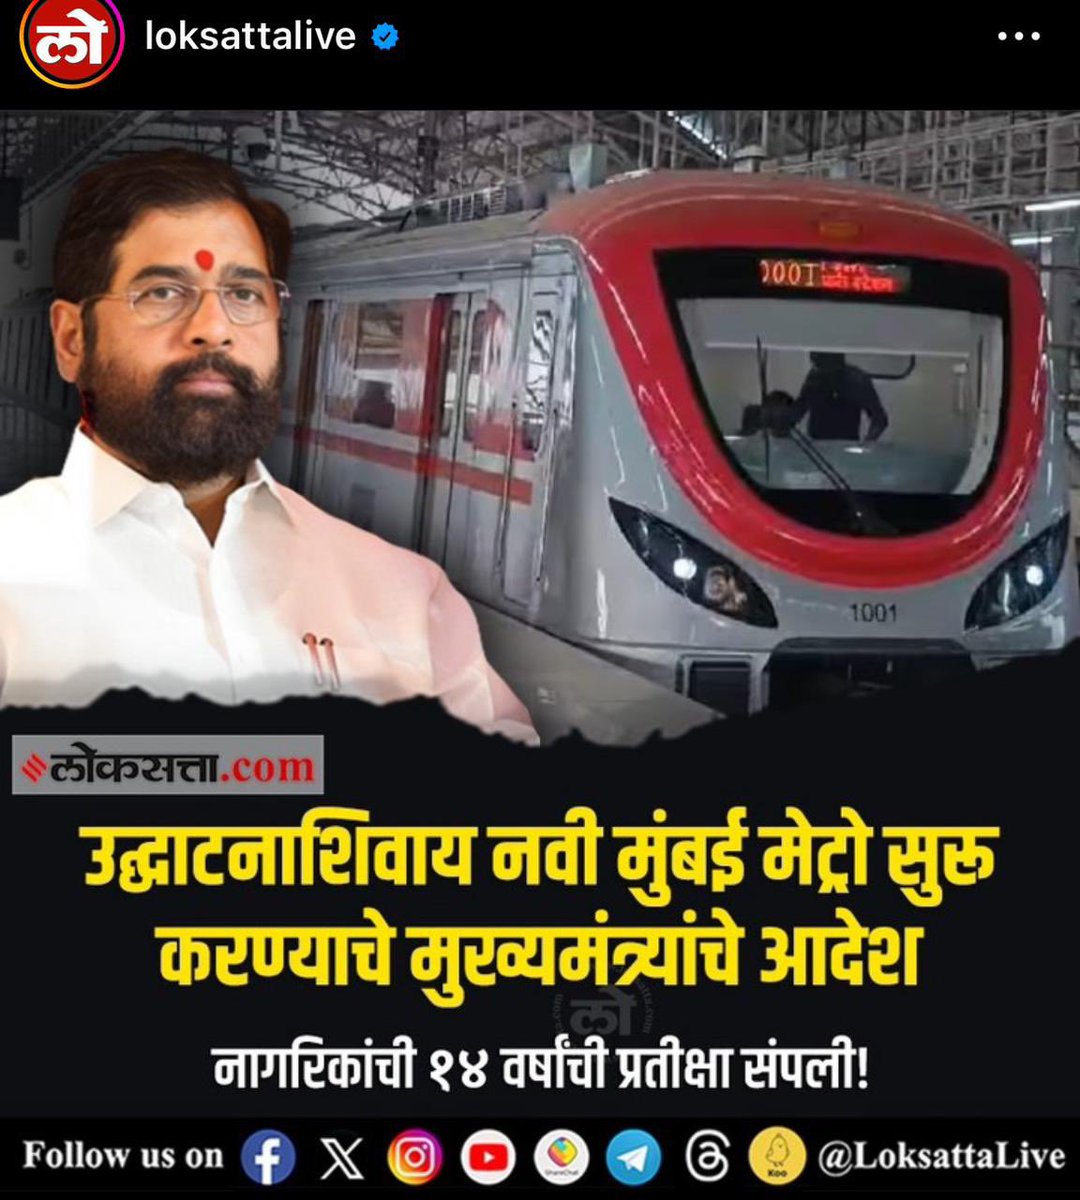 Another impact from my tweet yesterday and earlier. I had tweeted and mentioned in the media that the Navi Mumbai Metro has been ready for inauguration for 5 months, but the Khoke Sarkar politicians have no time for inauguration. Today, it seems that the illegal cm has asked…